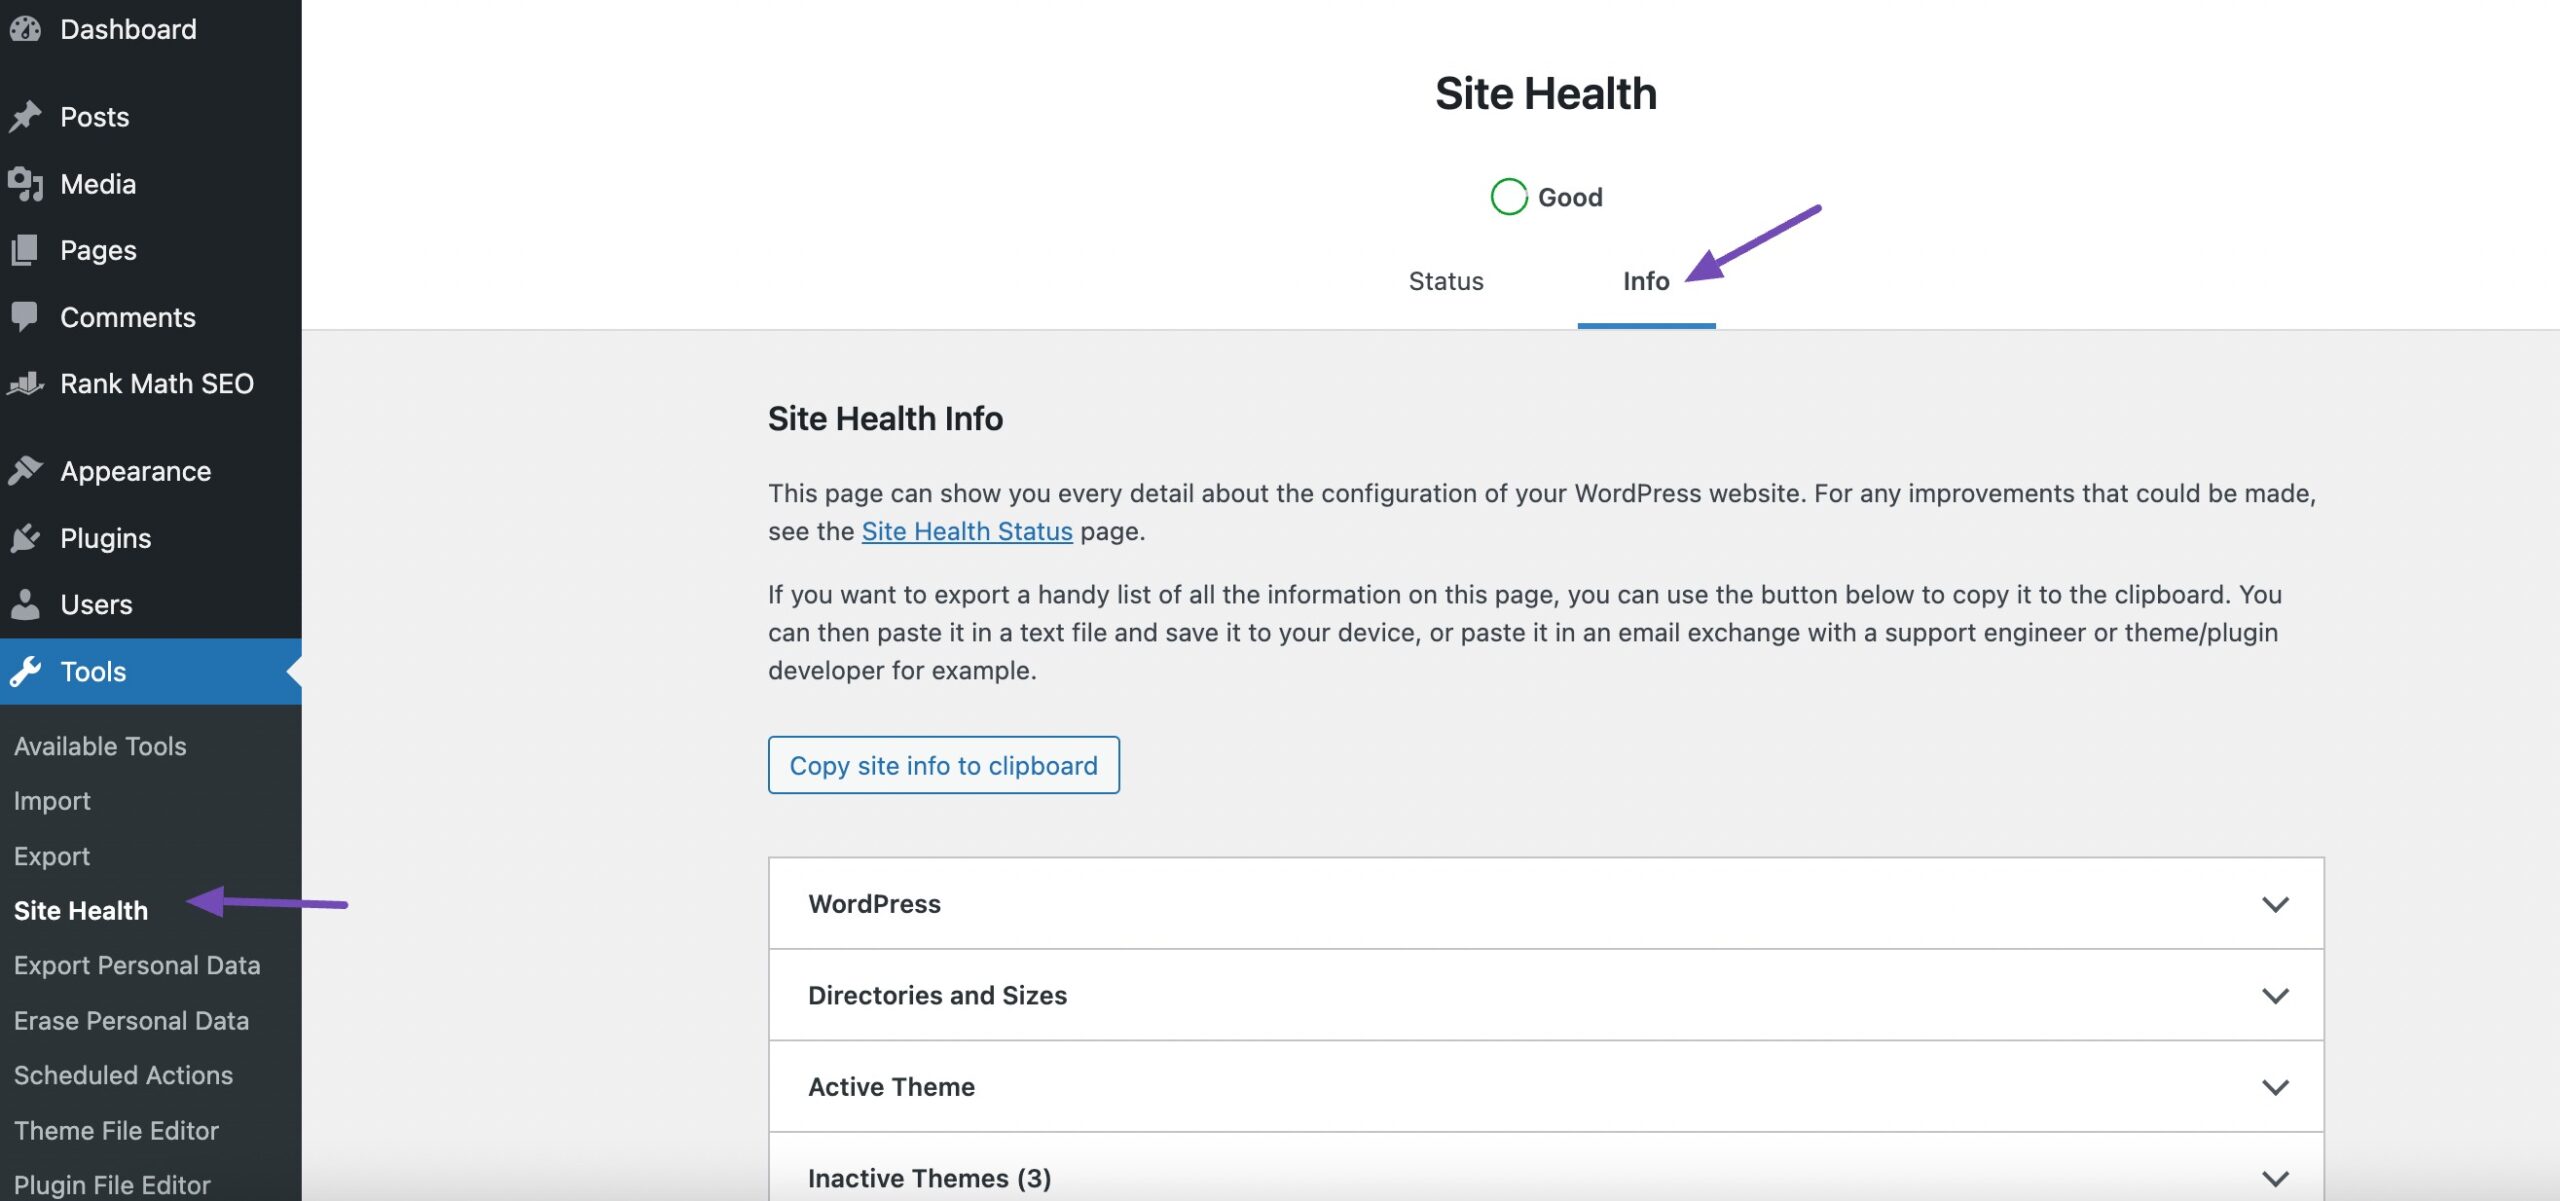 Site Health page